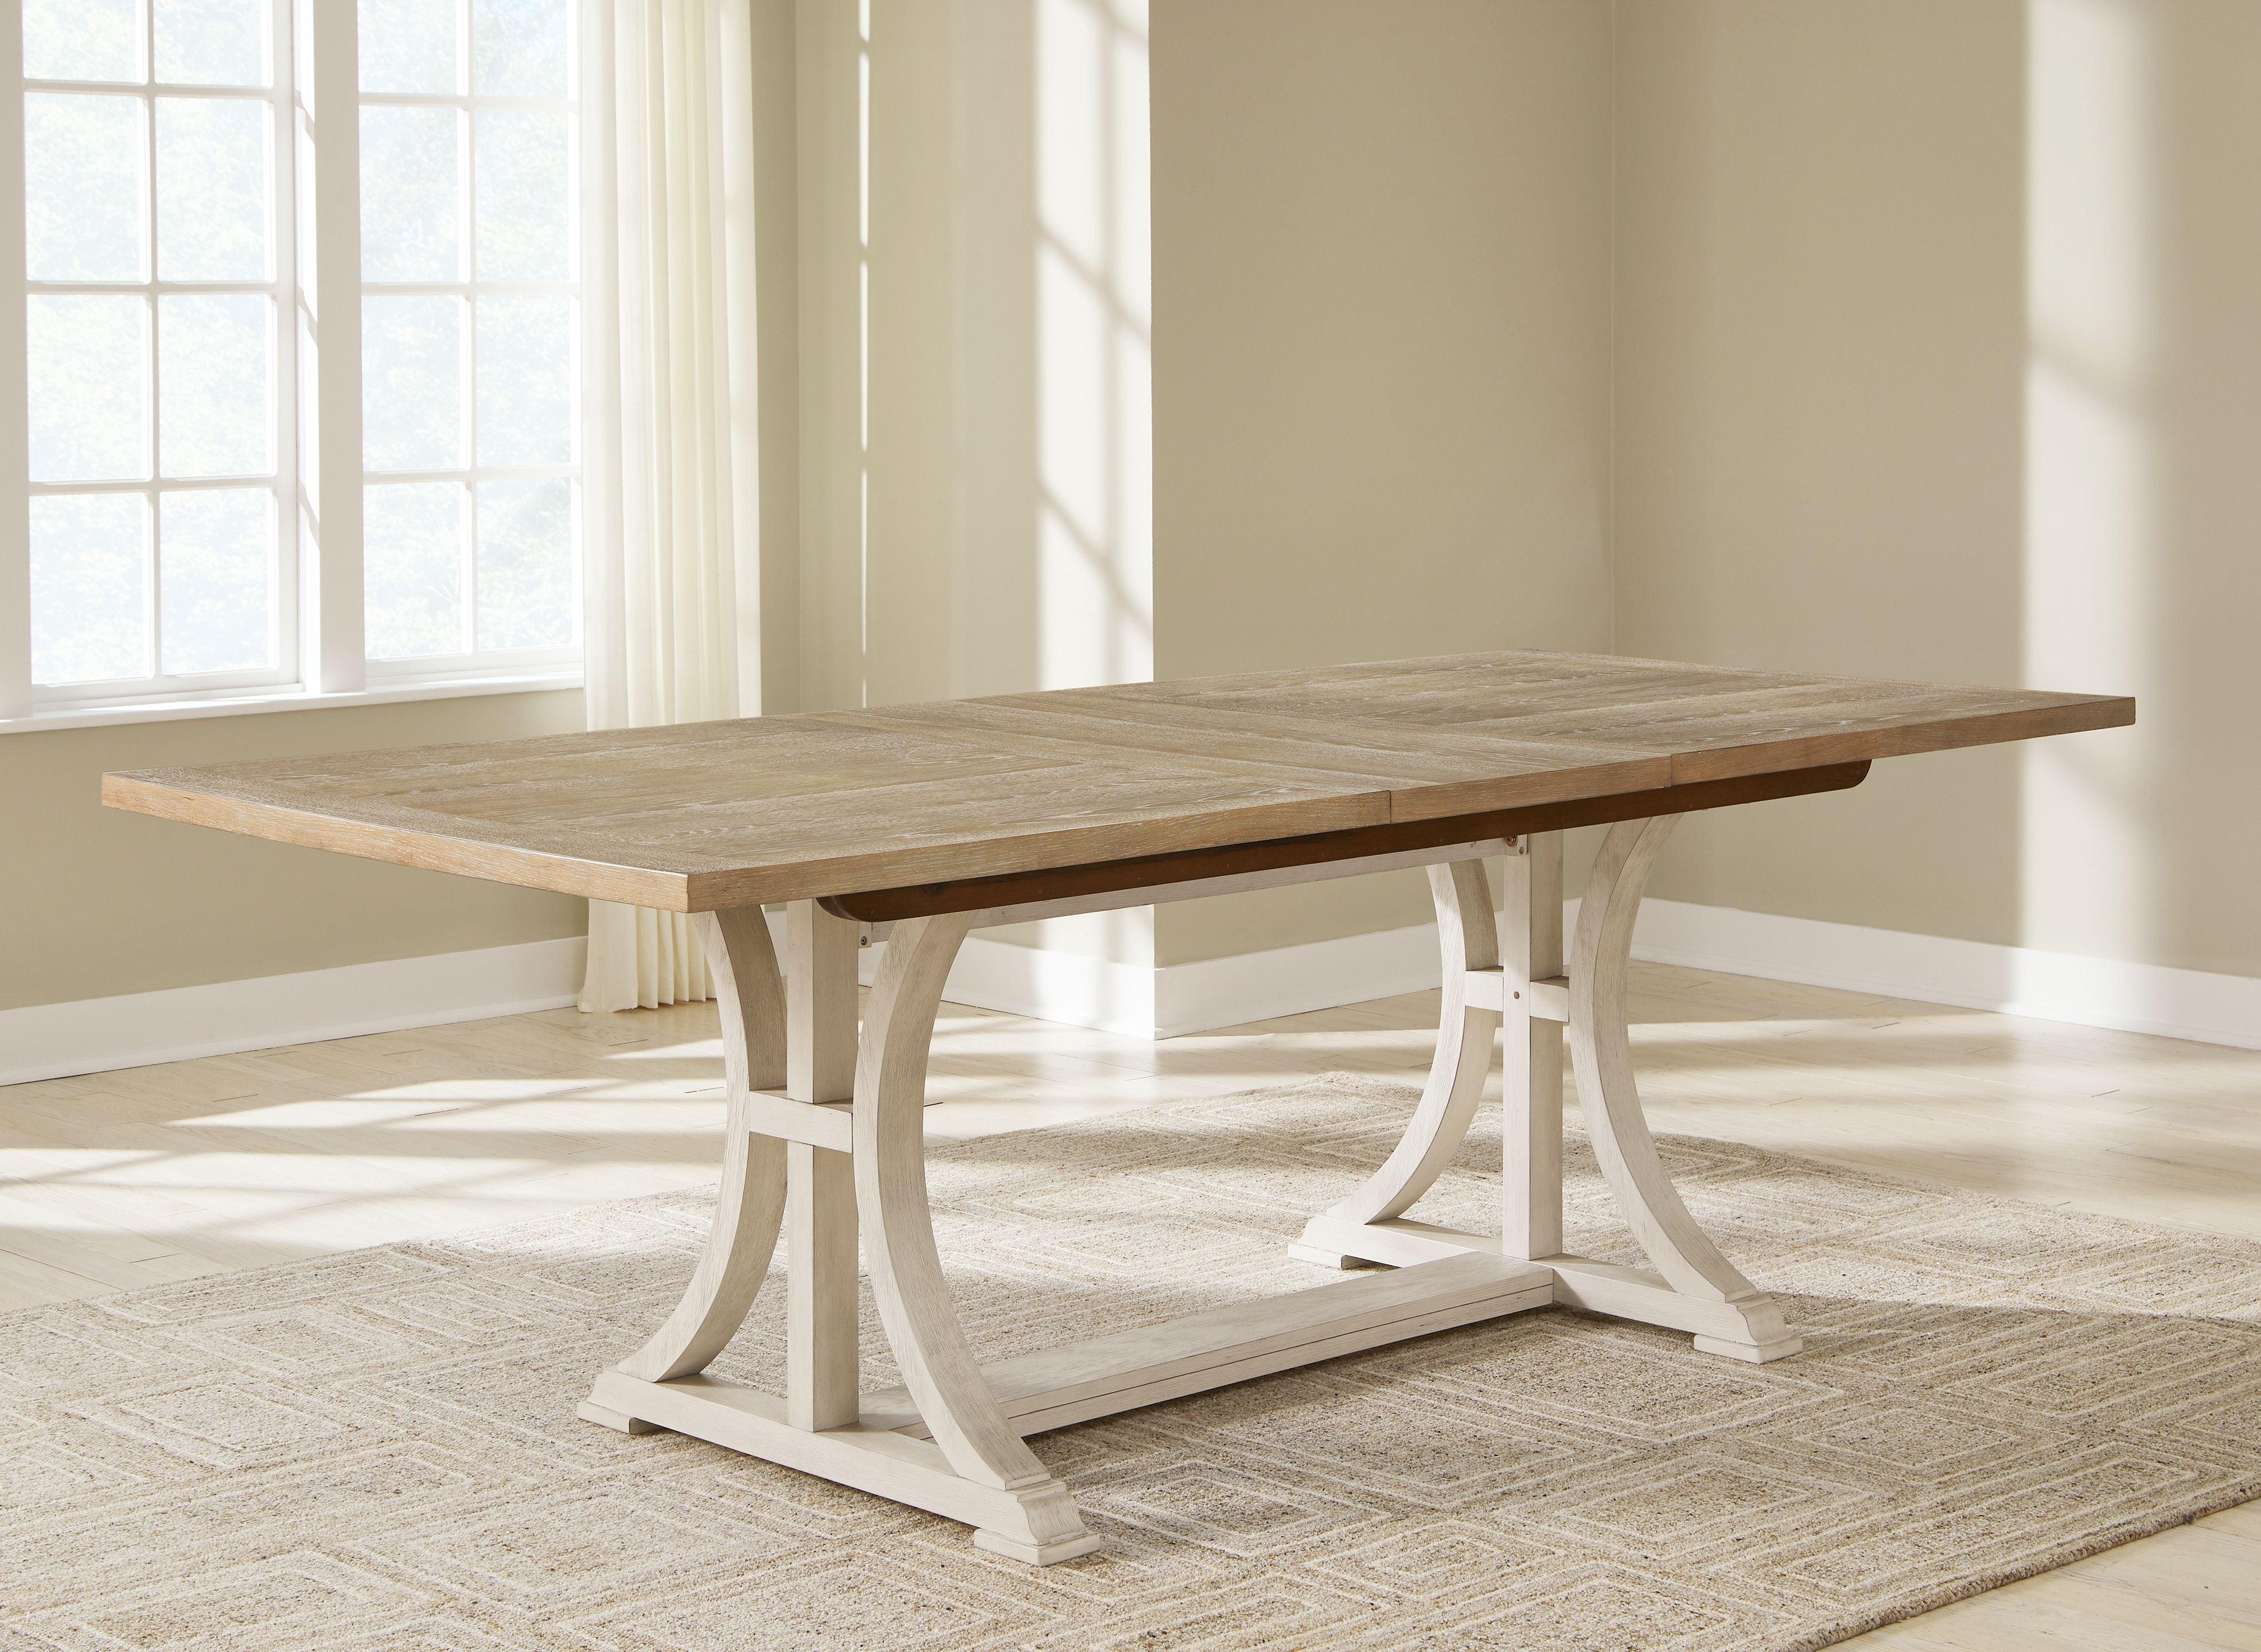 Benchcraft® - Shaybrock - Antique White / Brown - Rectangular Dining Room Extension Table - 5th Avenue Furniture